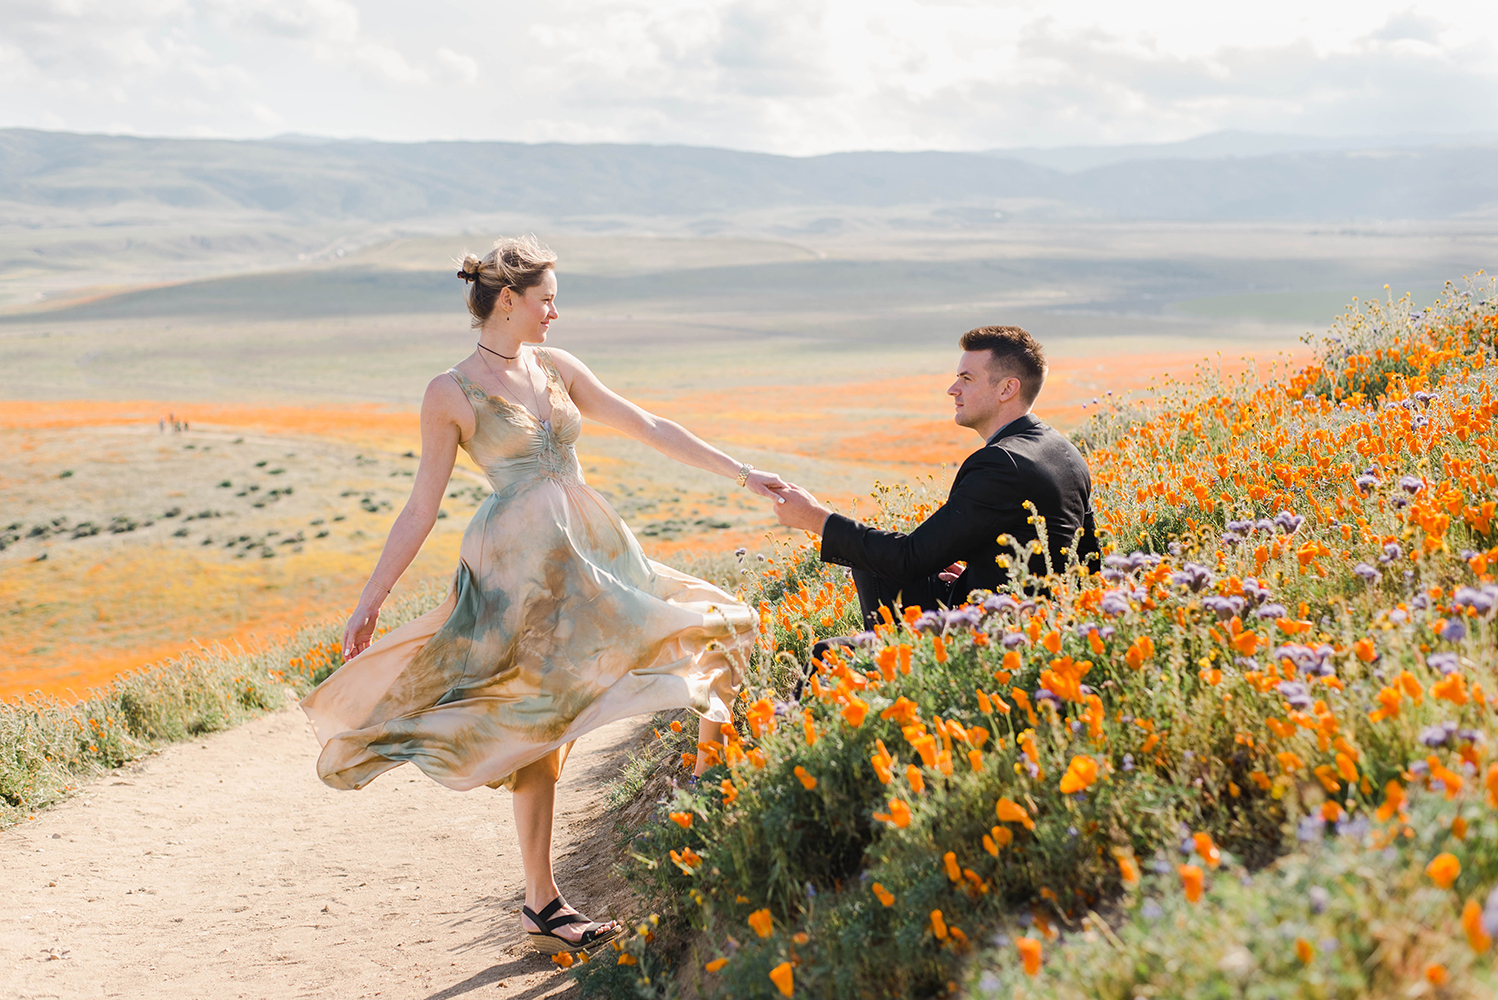 A man and woman hold hands in a field of wild flowers.